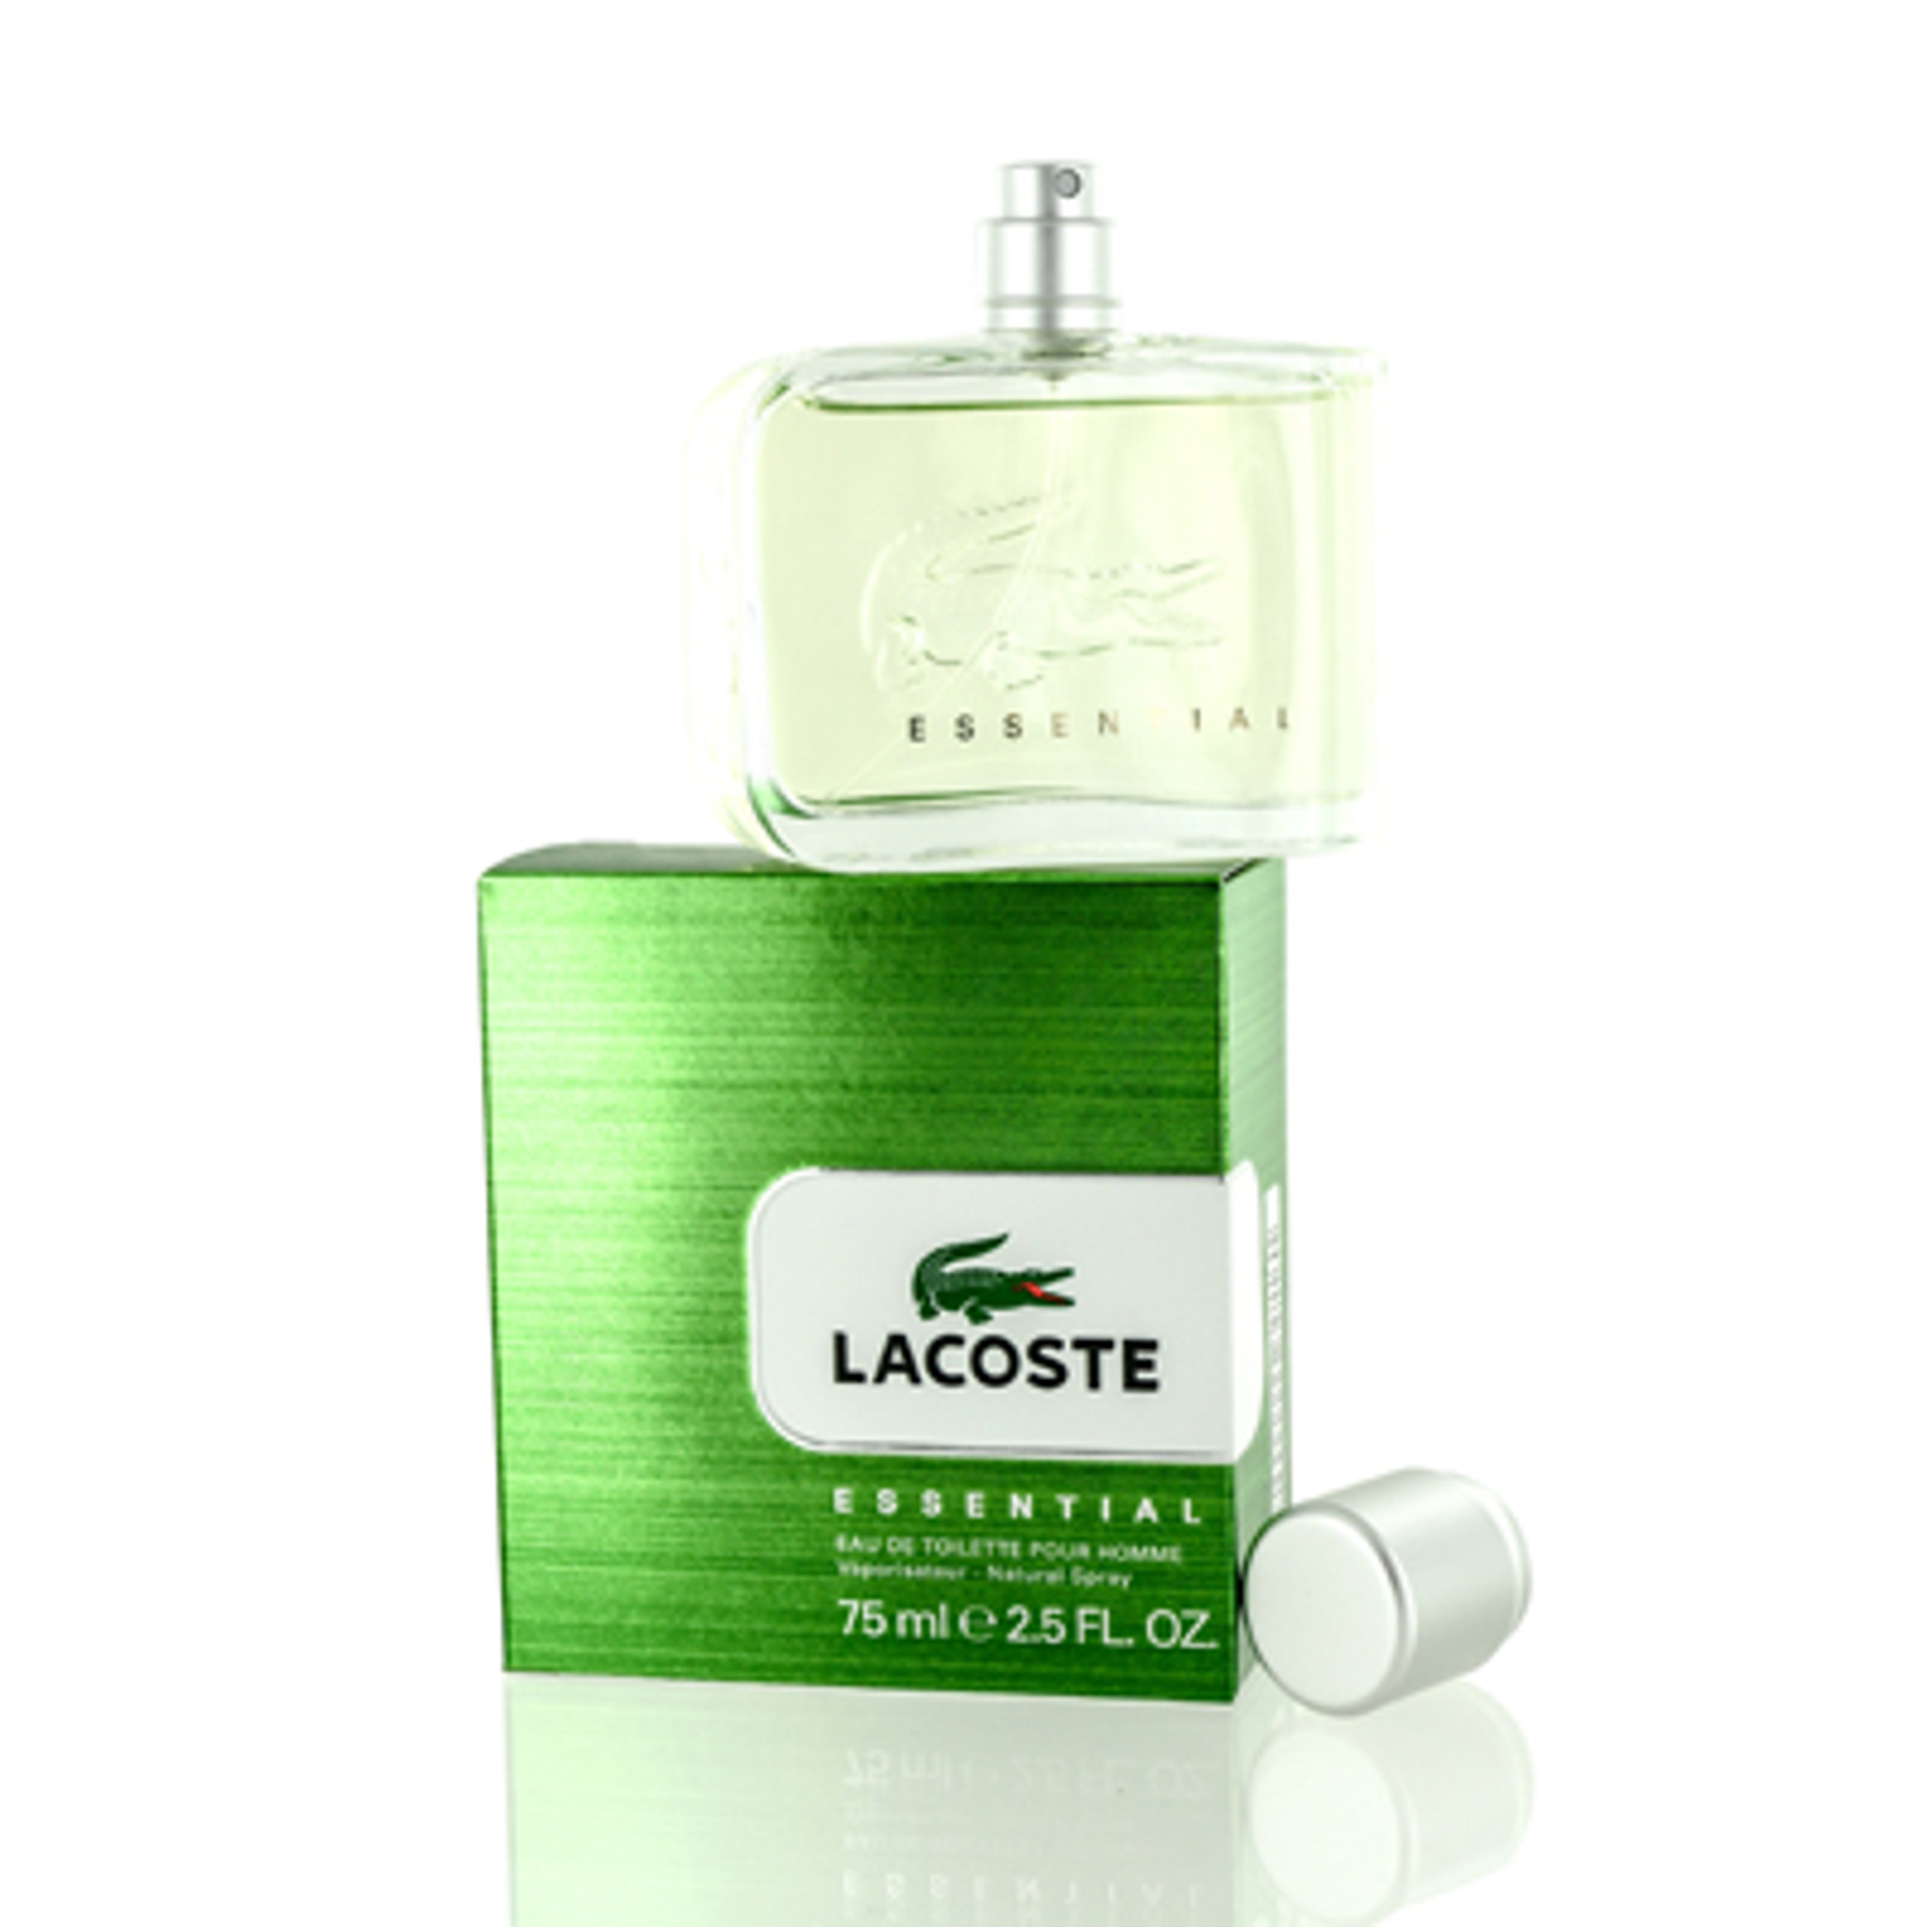 LACOSTE ESSENTIAL/LACOSTE EDT SPRAY 2.5